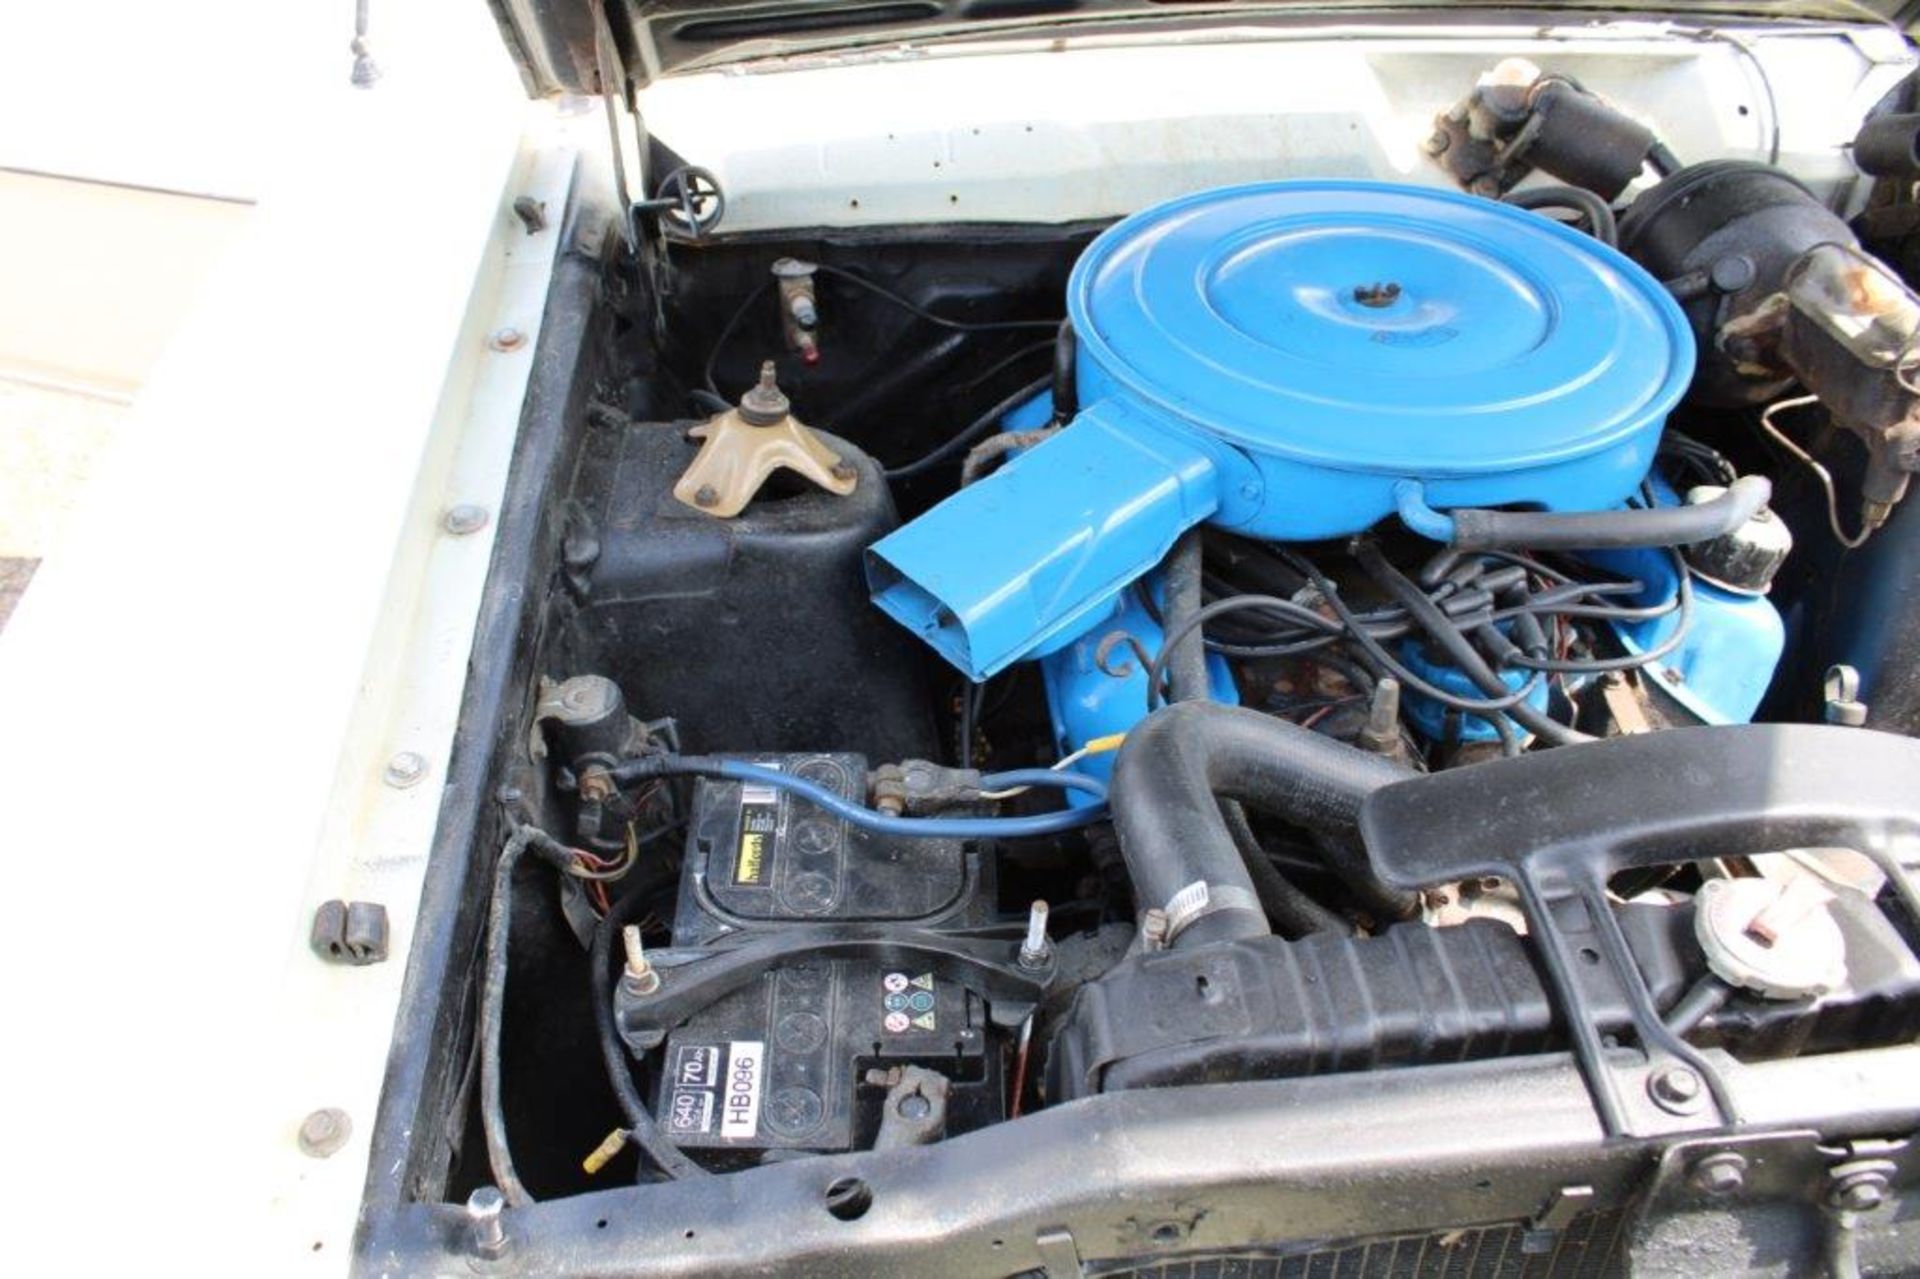 1969 Ford Ranchero 5.8 V8 Auto LHD - Image 18 of 25